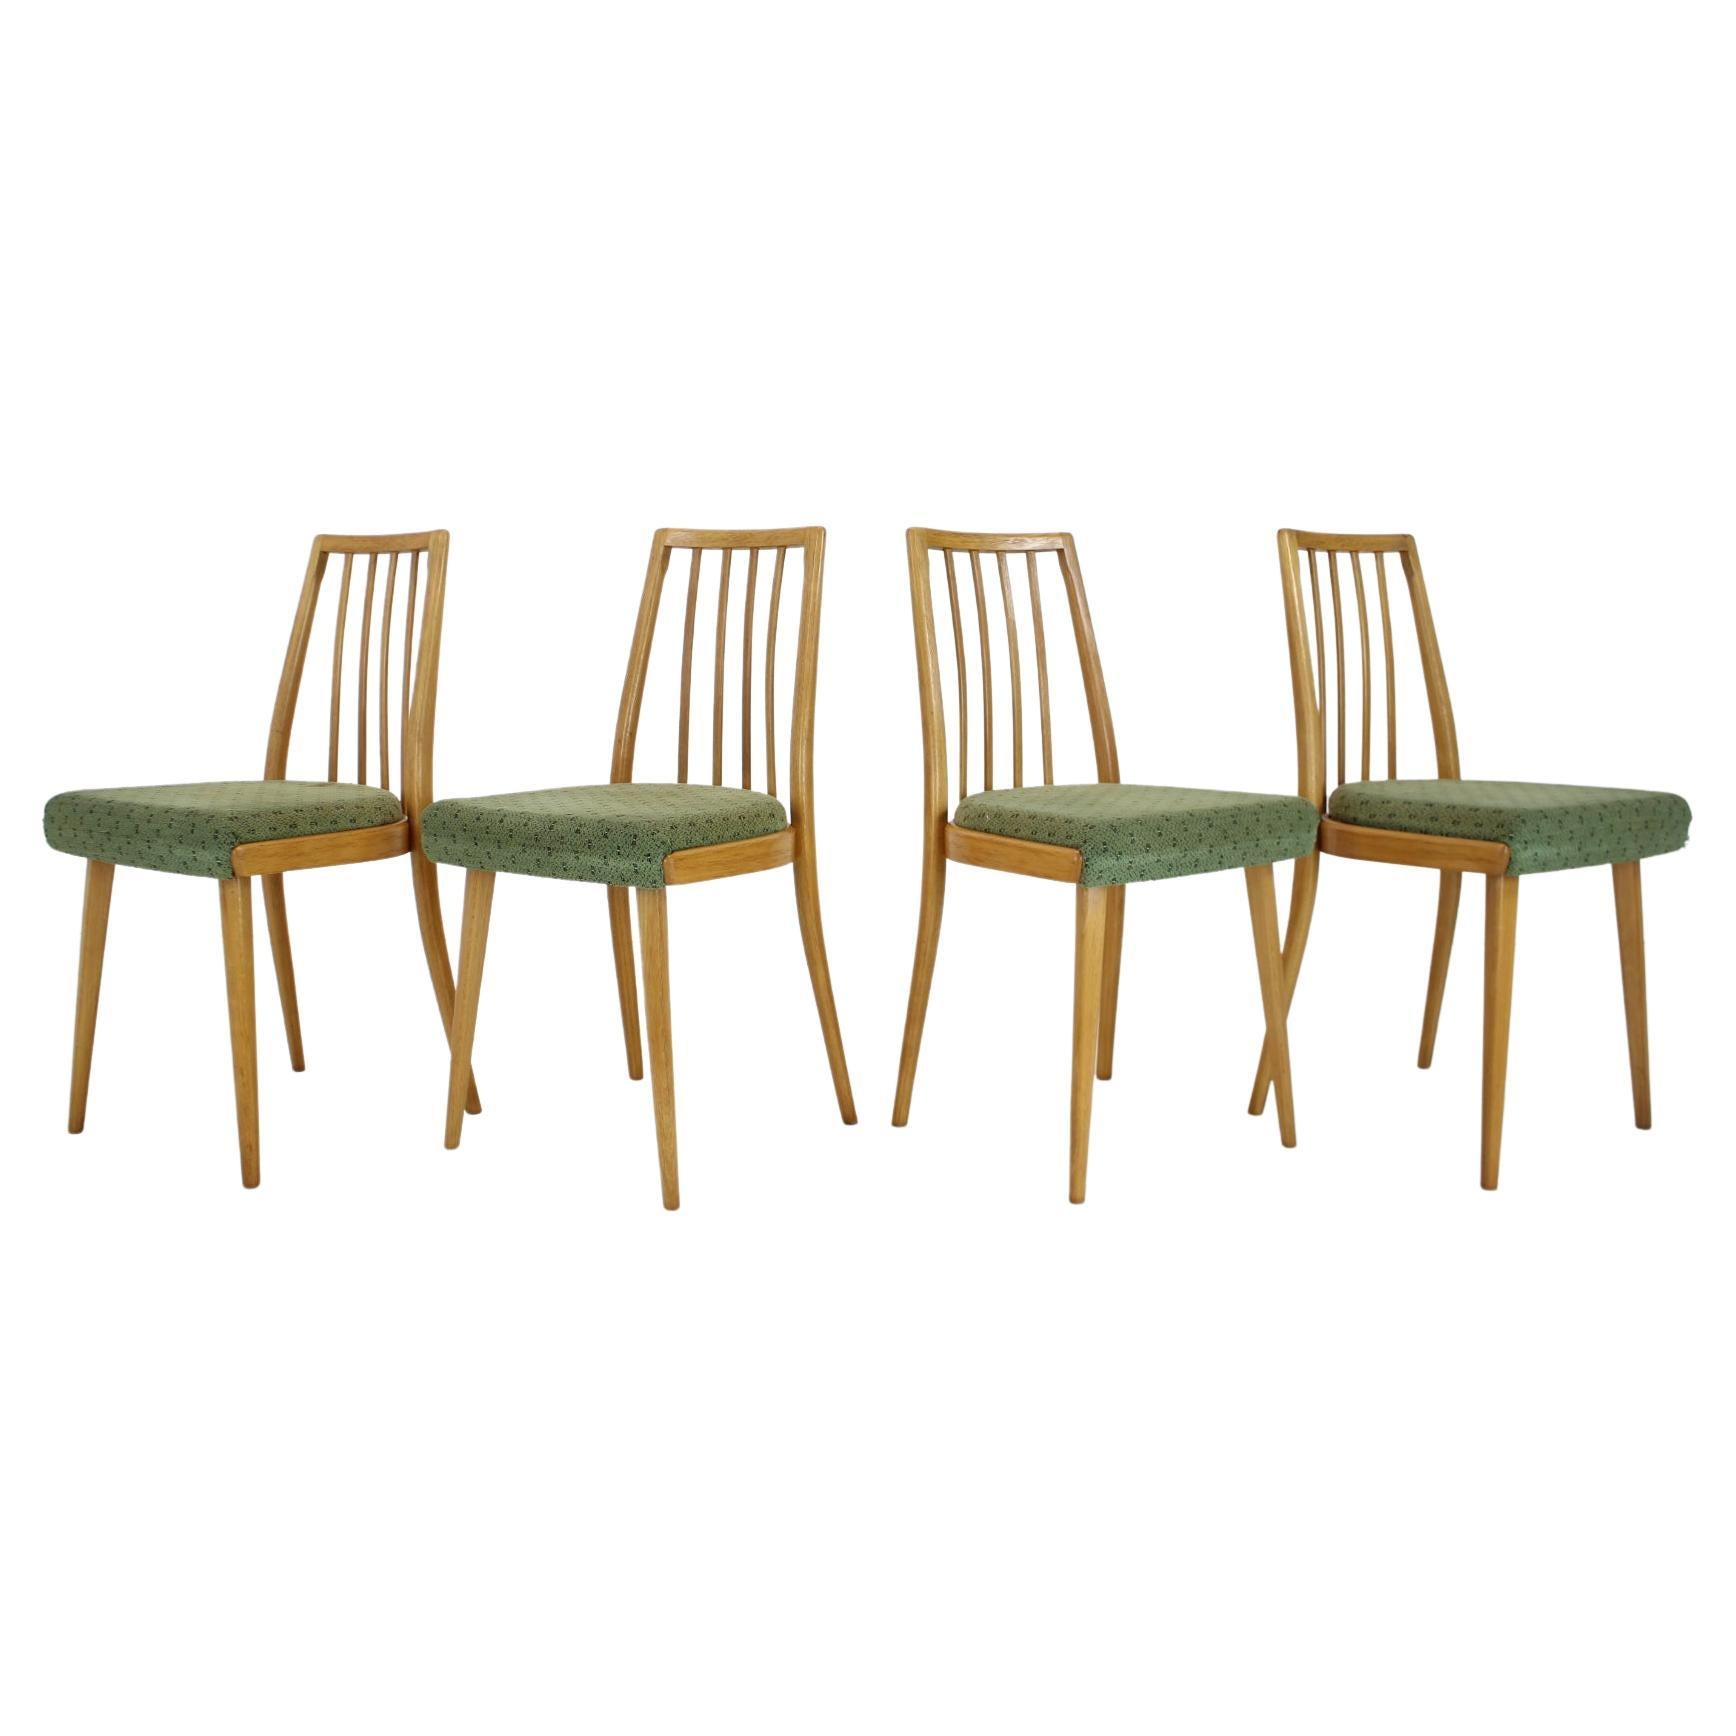 1970s Set of Four Dining Chairs by Ton, Czechoslovakia